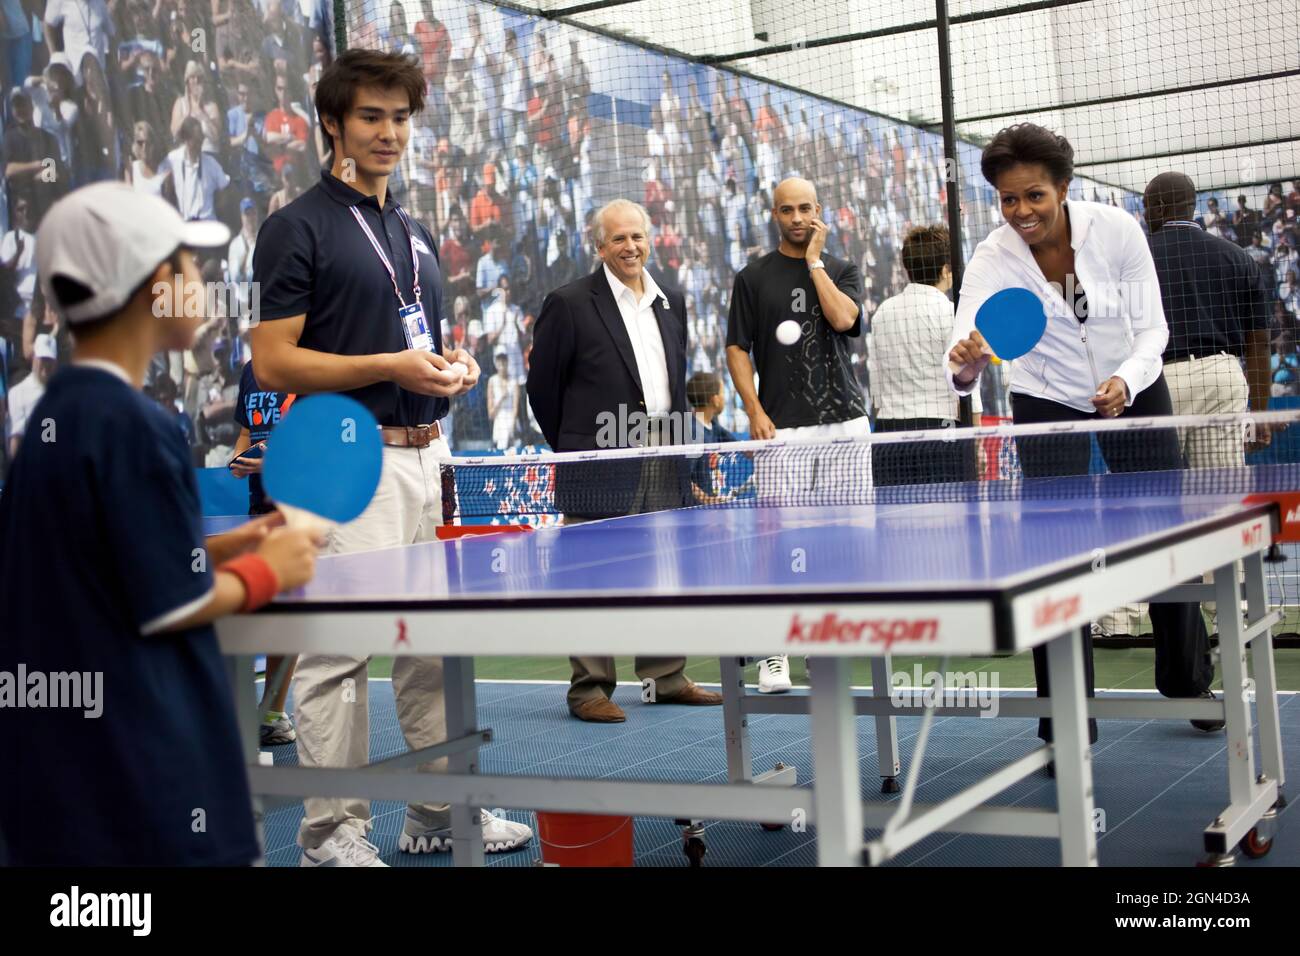 First Lady Michelle Obama plays table tennis during a Let's Move! event at the USTA Billie Jean King National Tennis Center in New York, N.Y., Sept. 9, 2011. (Official White House Photo by Samantha Appleton) This official White House photograph is being made available only for publication by news organizations and/or for personal use printing by the subject(s) of the photograph. The photograph may not be manipulated in any way and may not be used in commercial or political materials, advertisements, emails, products, promotions that in any way suggests approval or endorsement of the President, Stock Photo